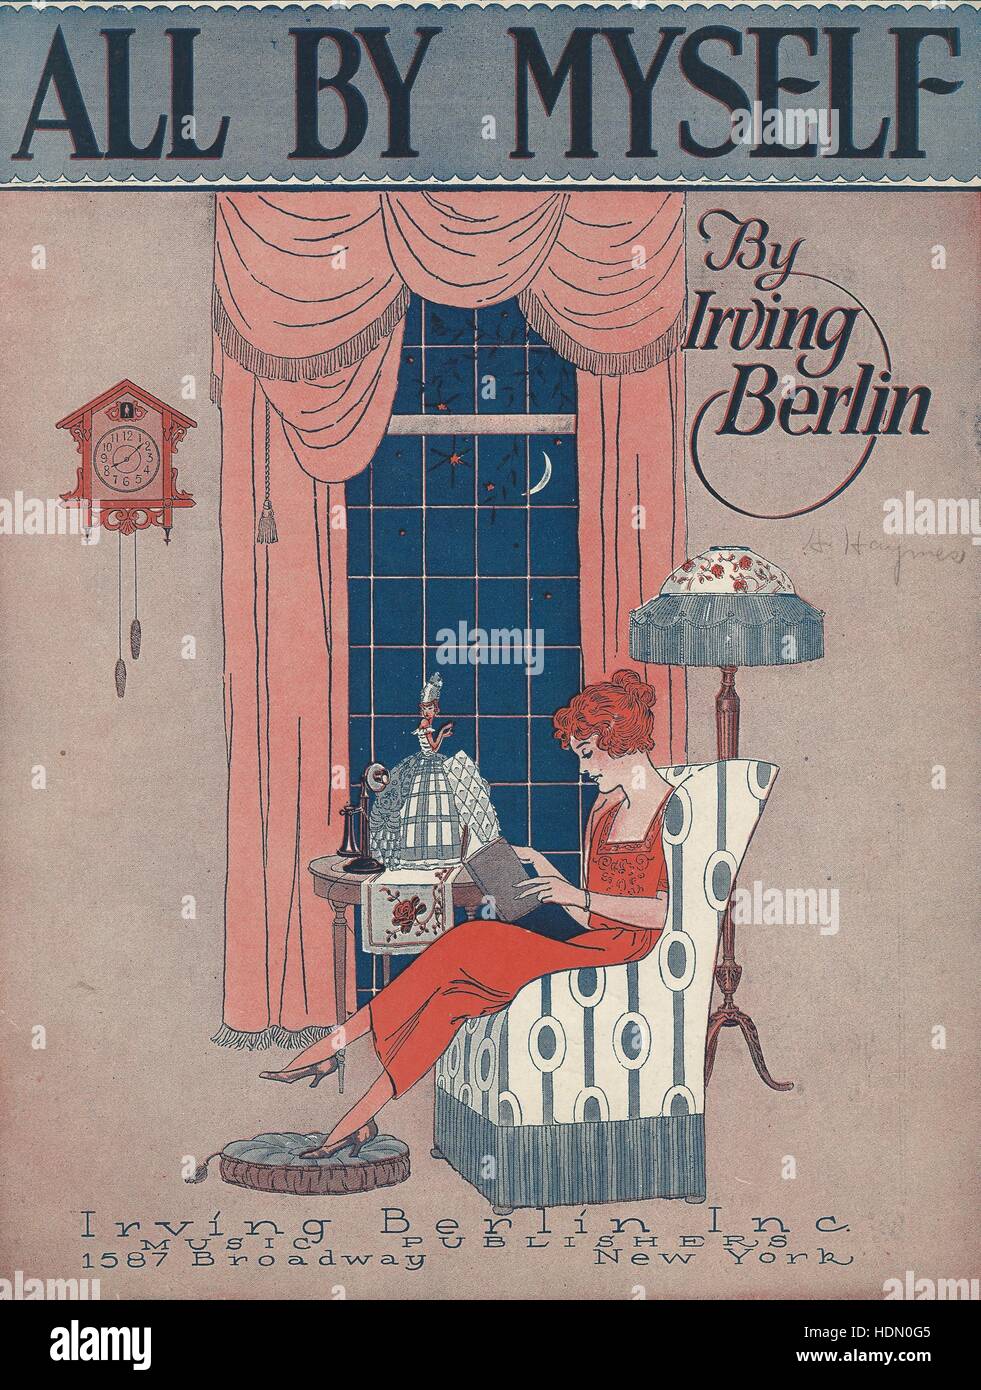 'All By Myself' 1921 Irving Berlin Sheet Music Cover Stock Photo